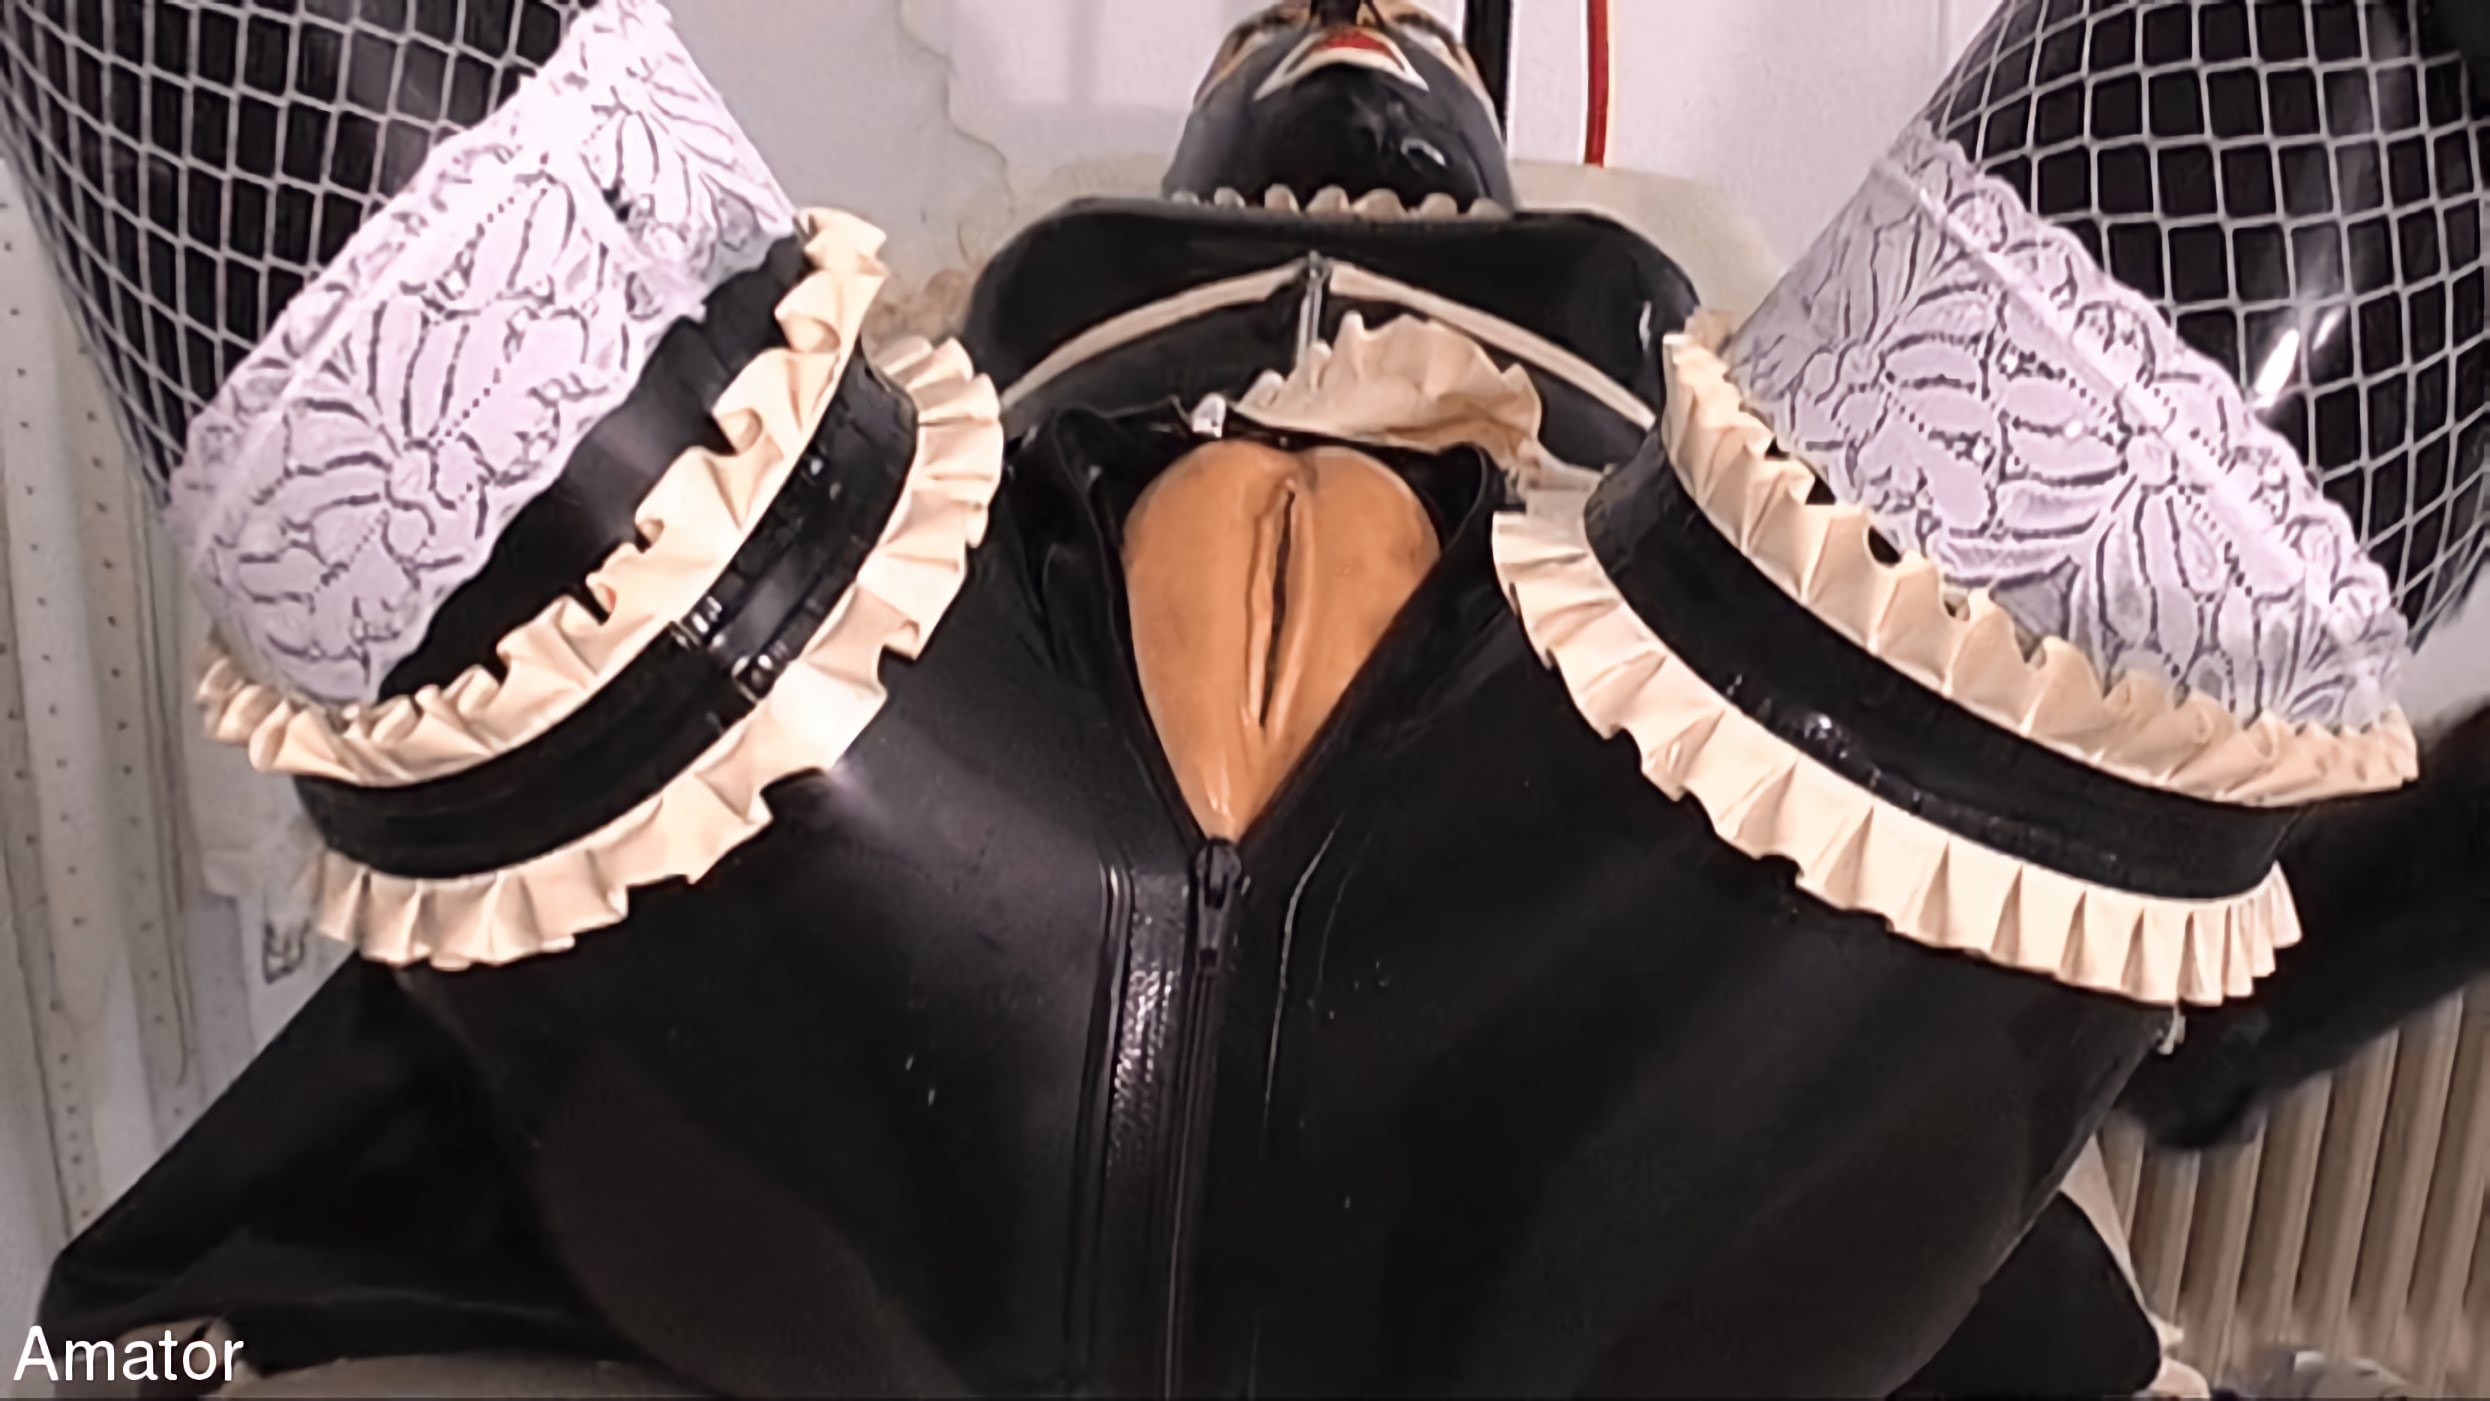 Kink Partners 'The rubber maid in the clinic part 2' starring Madame Zoe (Photo 2)